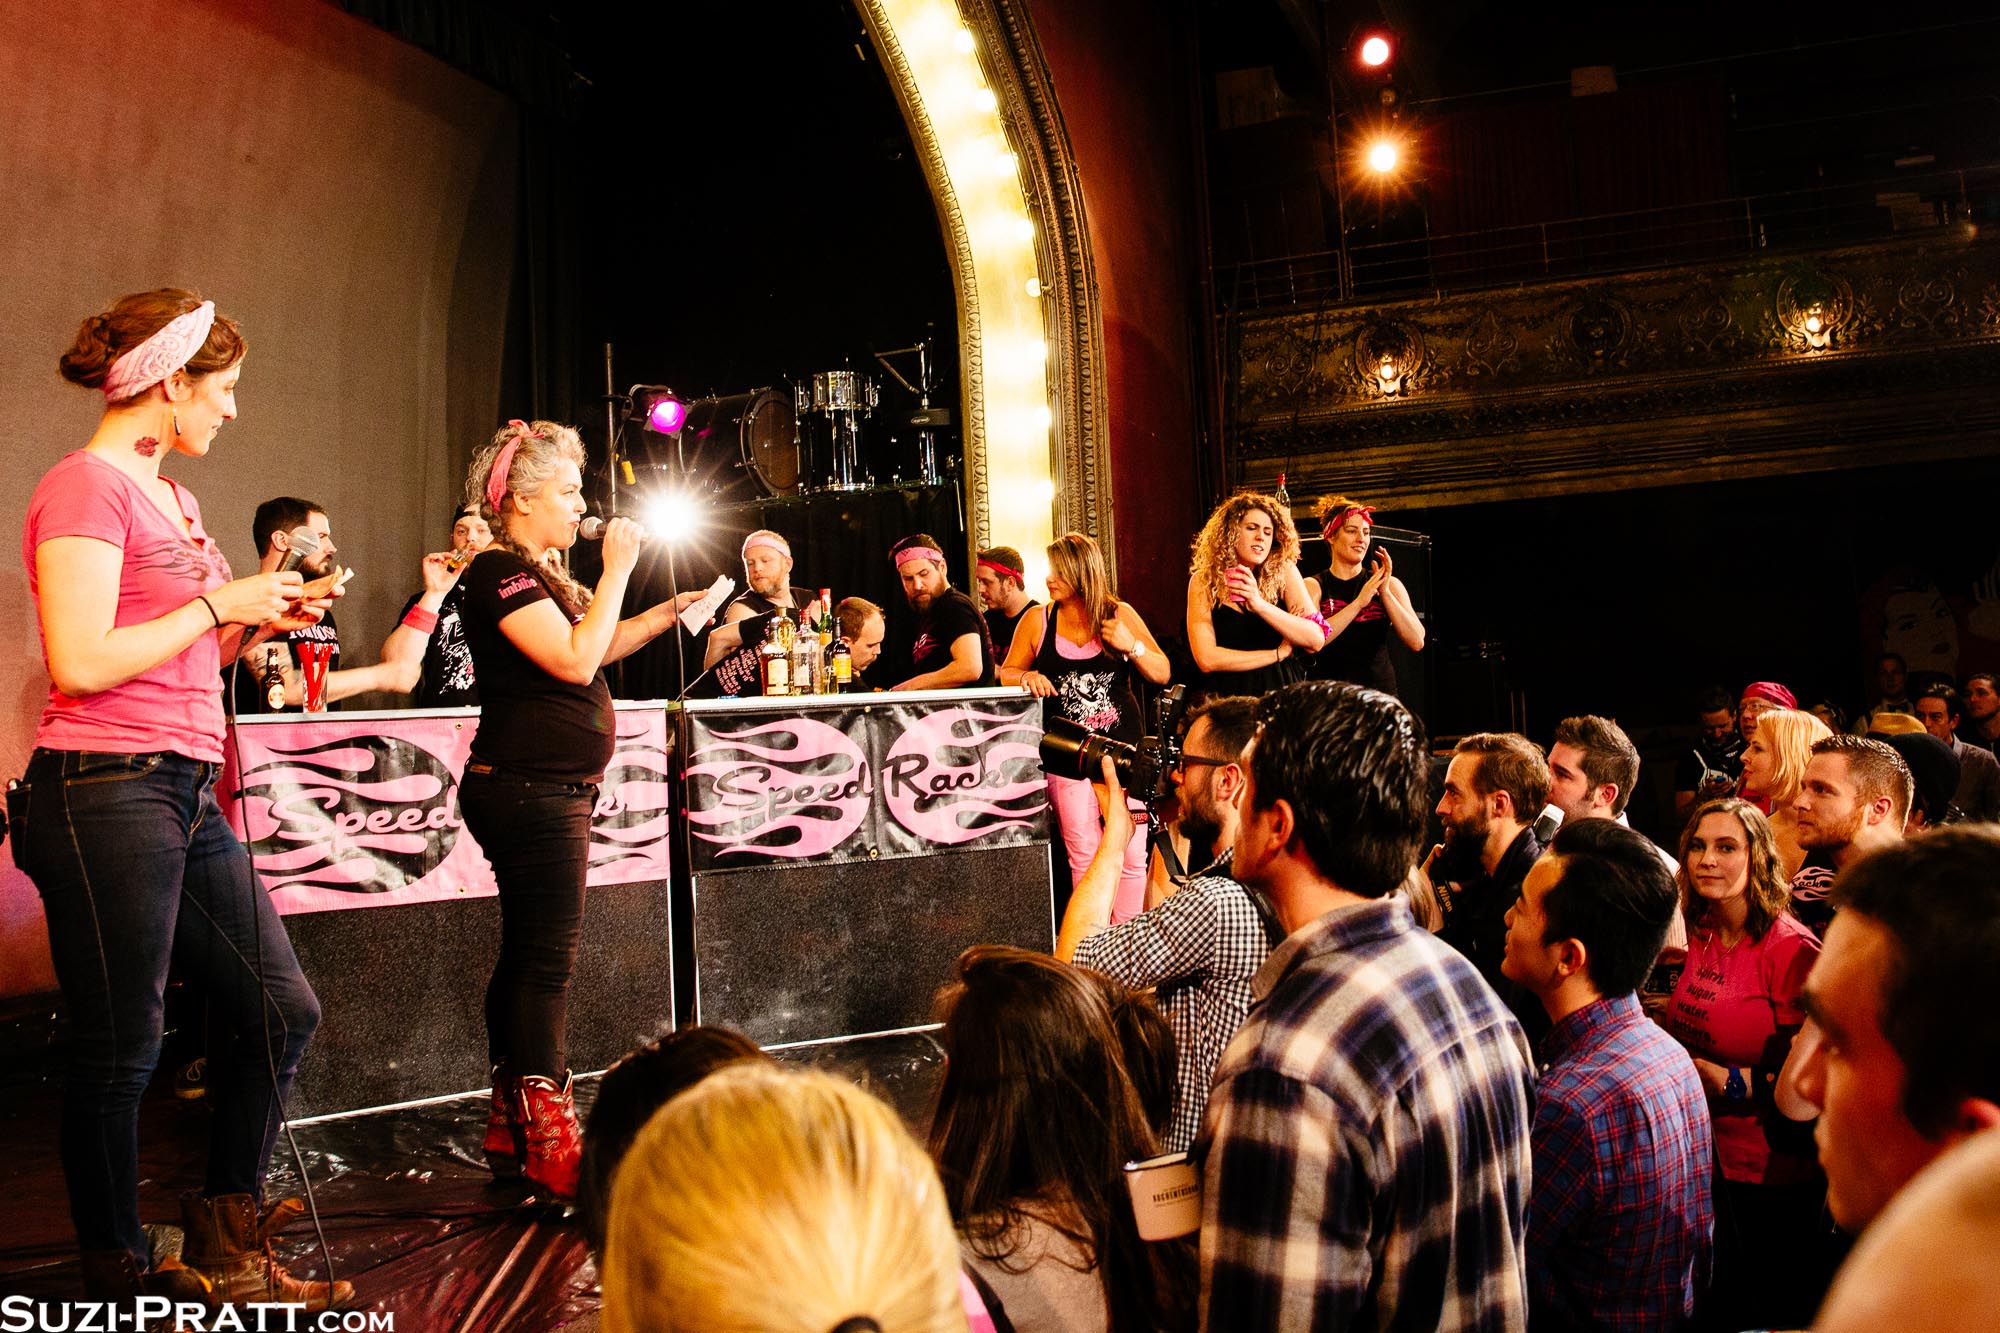 Speed Rack Seattle female bartending competition